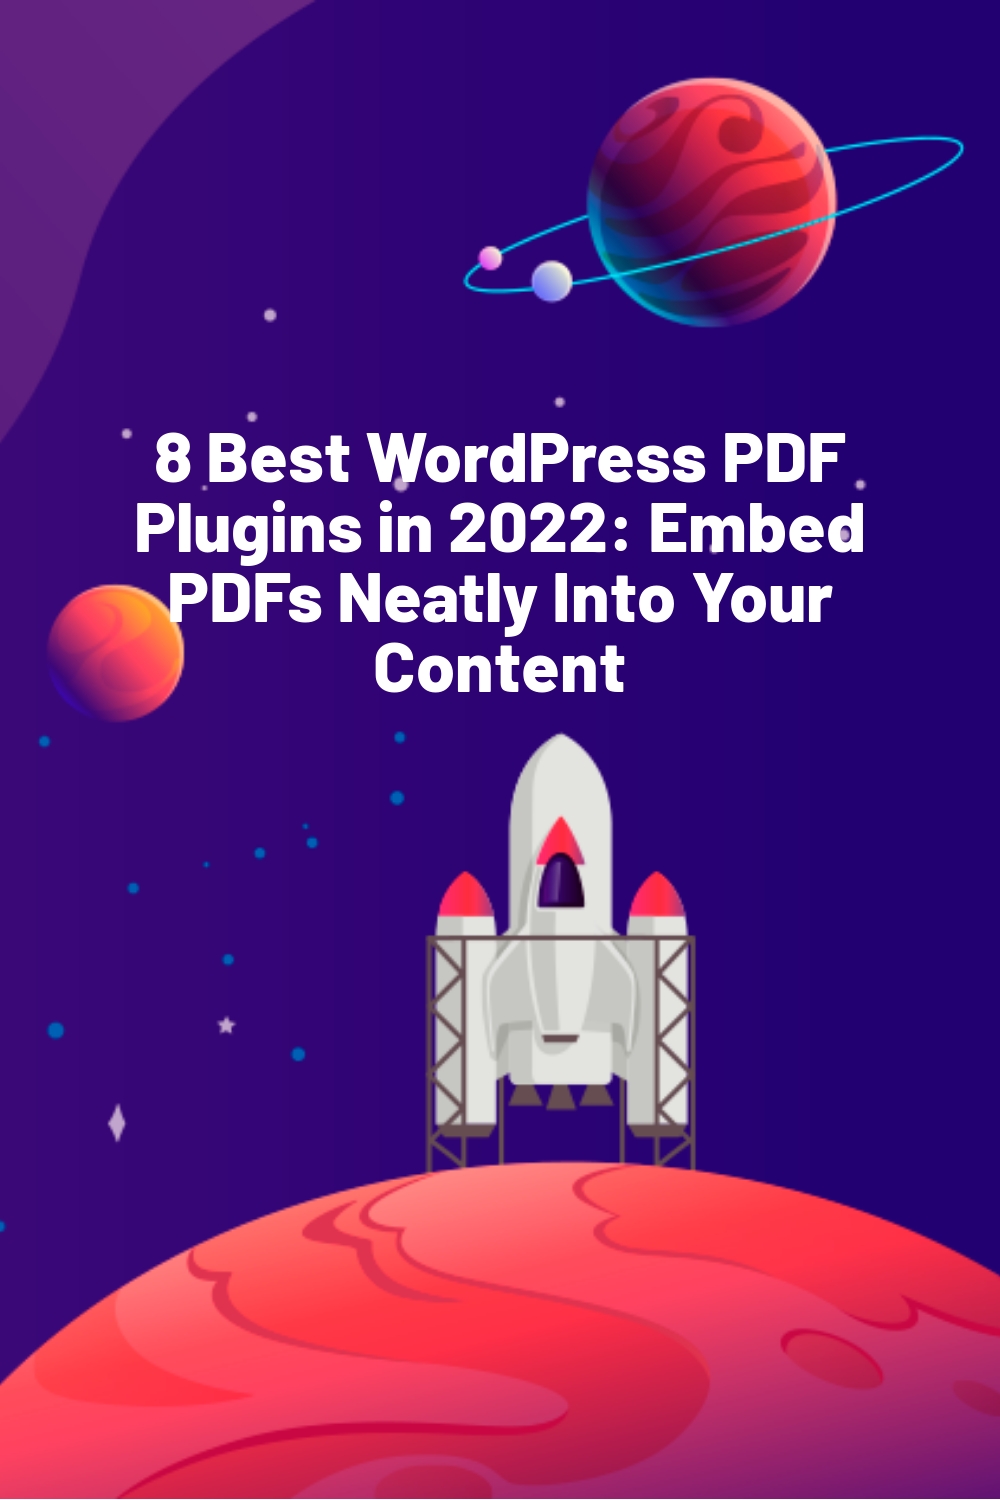 8 Best WordPress PDF Plugins in 2022: Embed PDFs Neatly Into Your Content